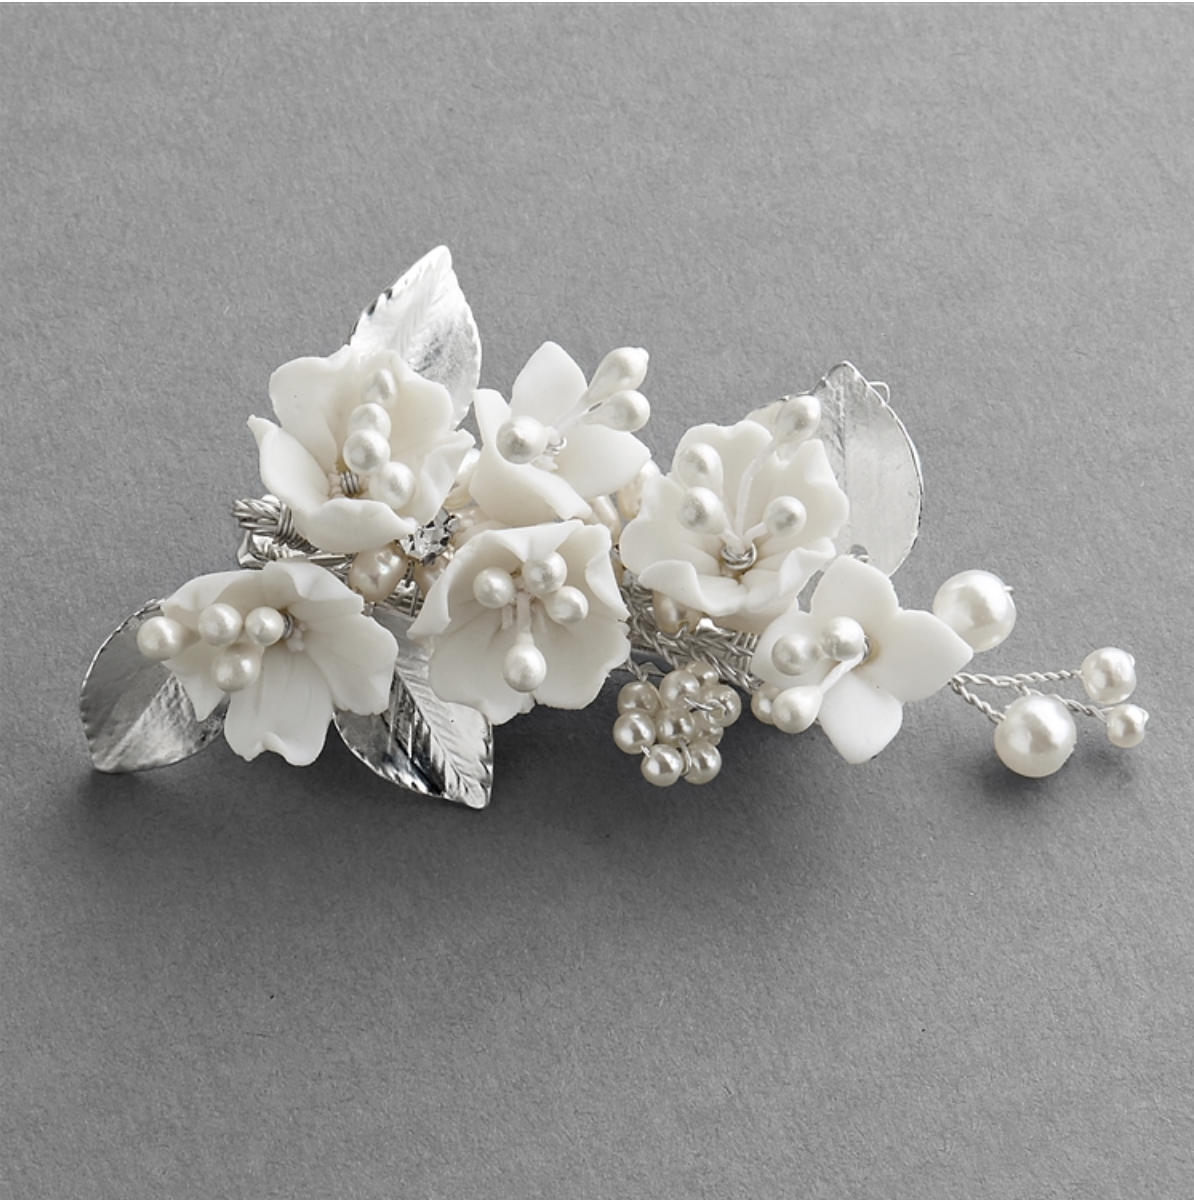 White Resin Flowers, Pearls Matte Silver Leaves